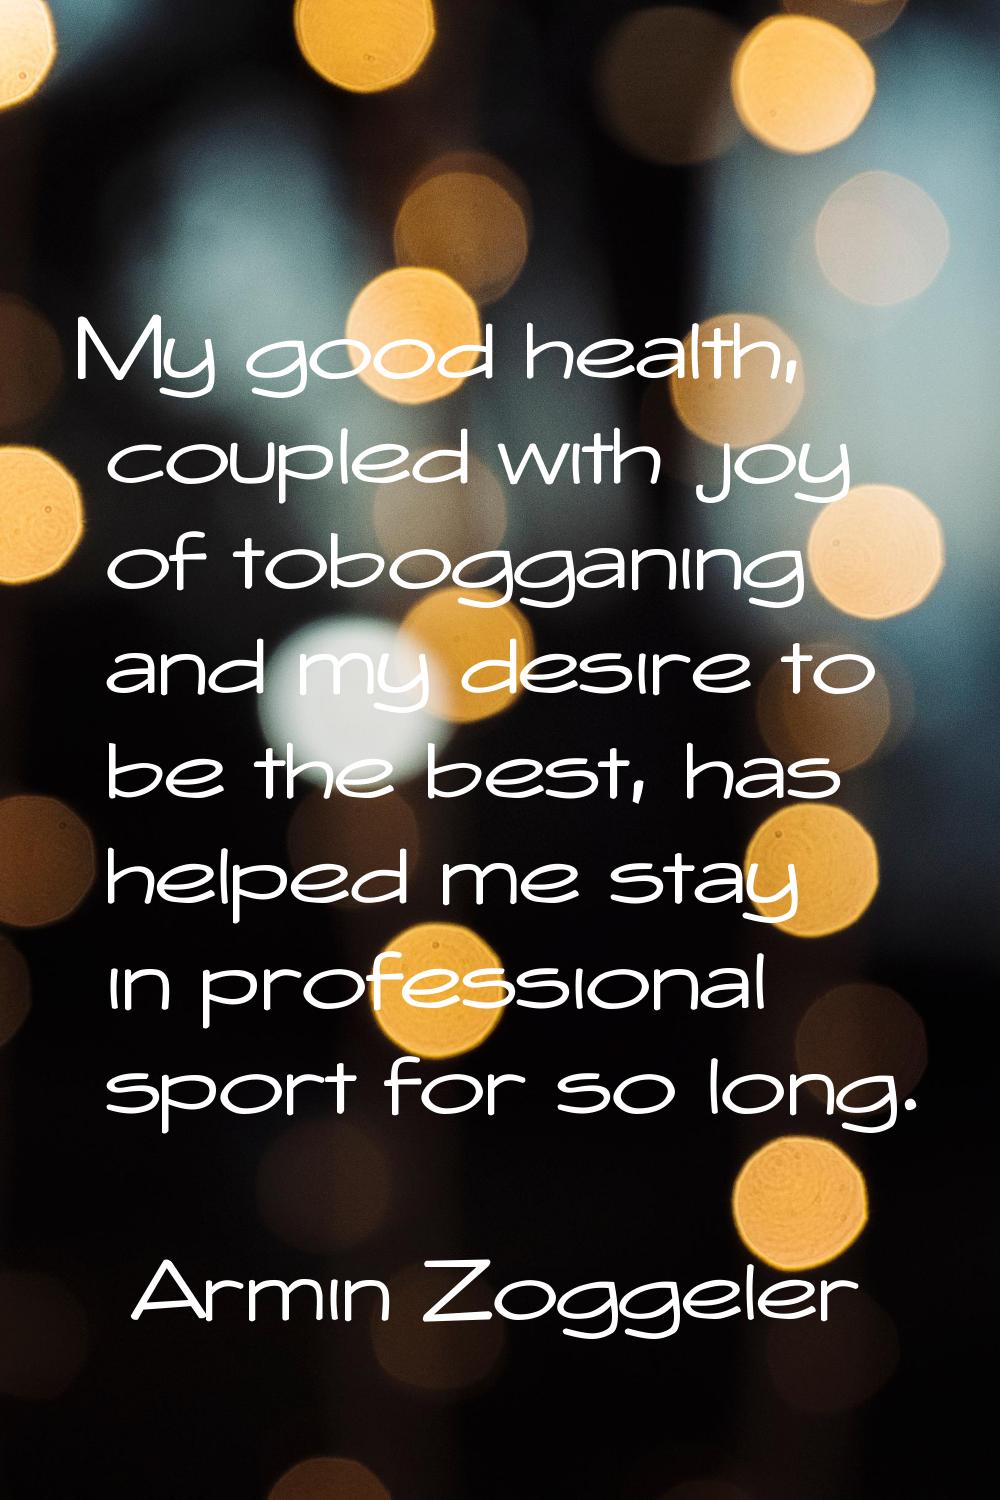 My good health, coupled with joy of tobogganing and my desire to be the best, has helped me stay in